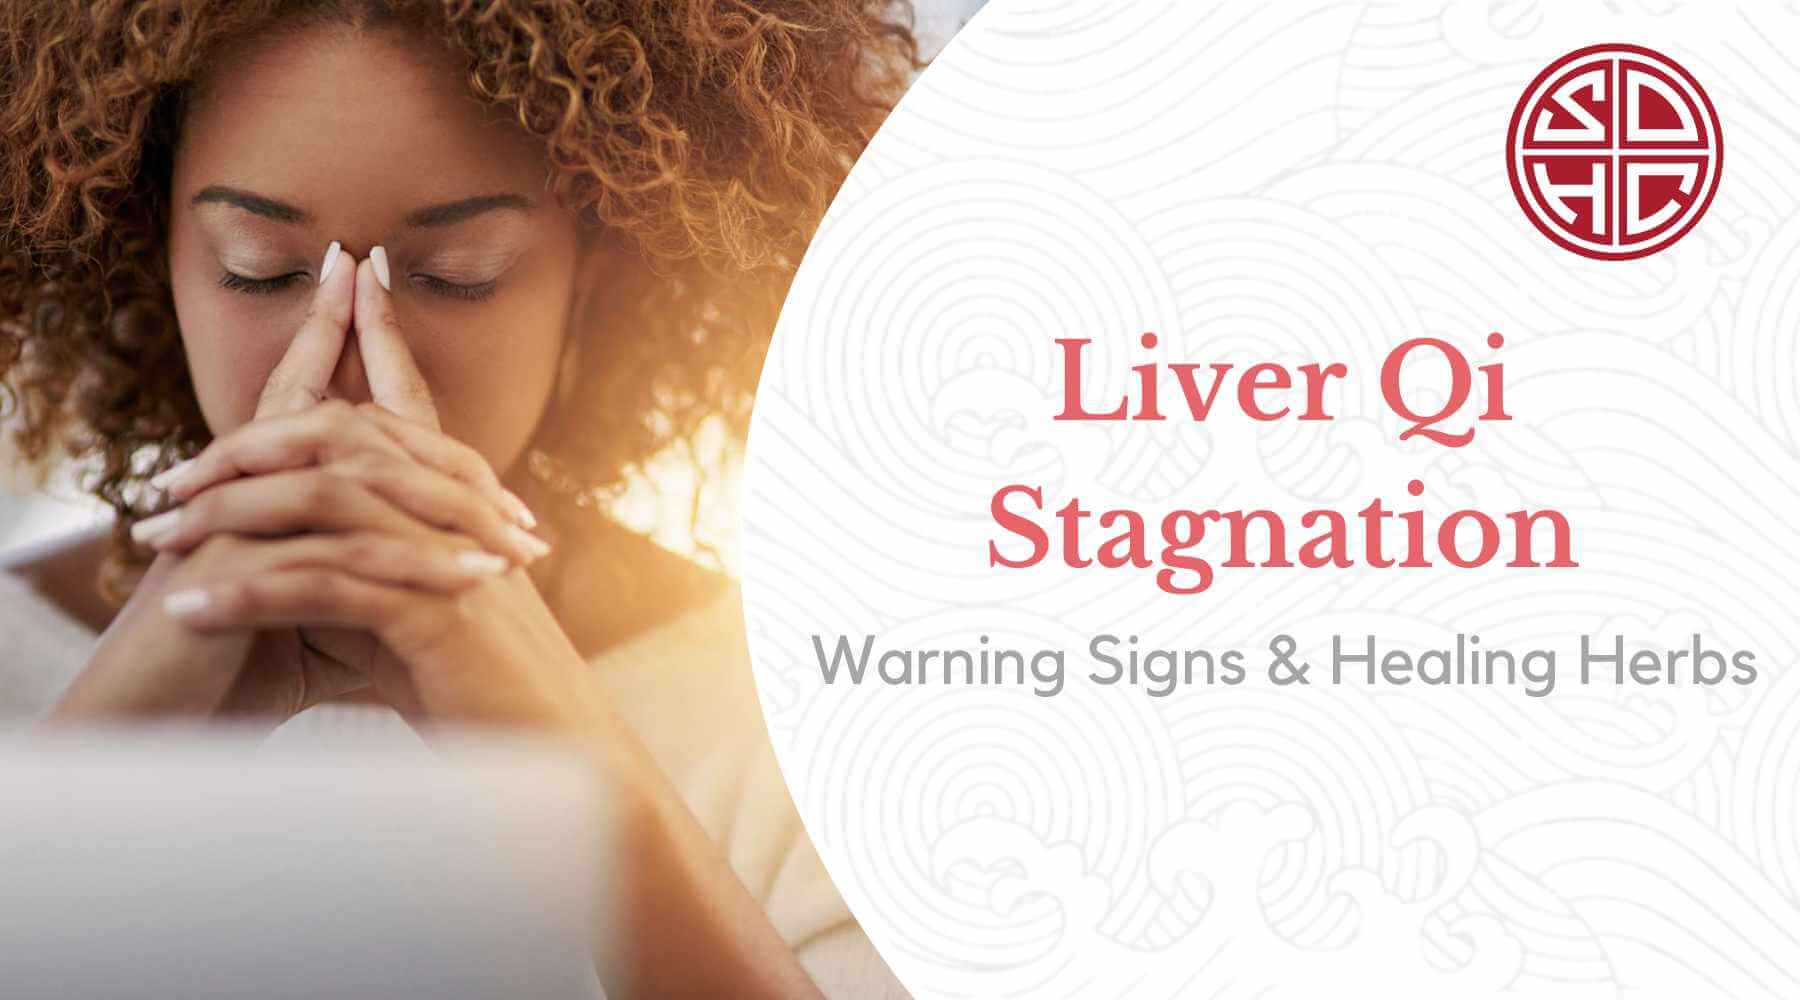 Liver Qi Stagnation - Warning signs & healing herbs